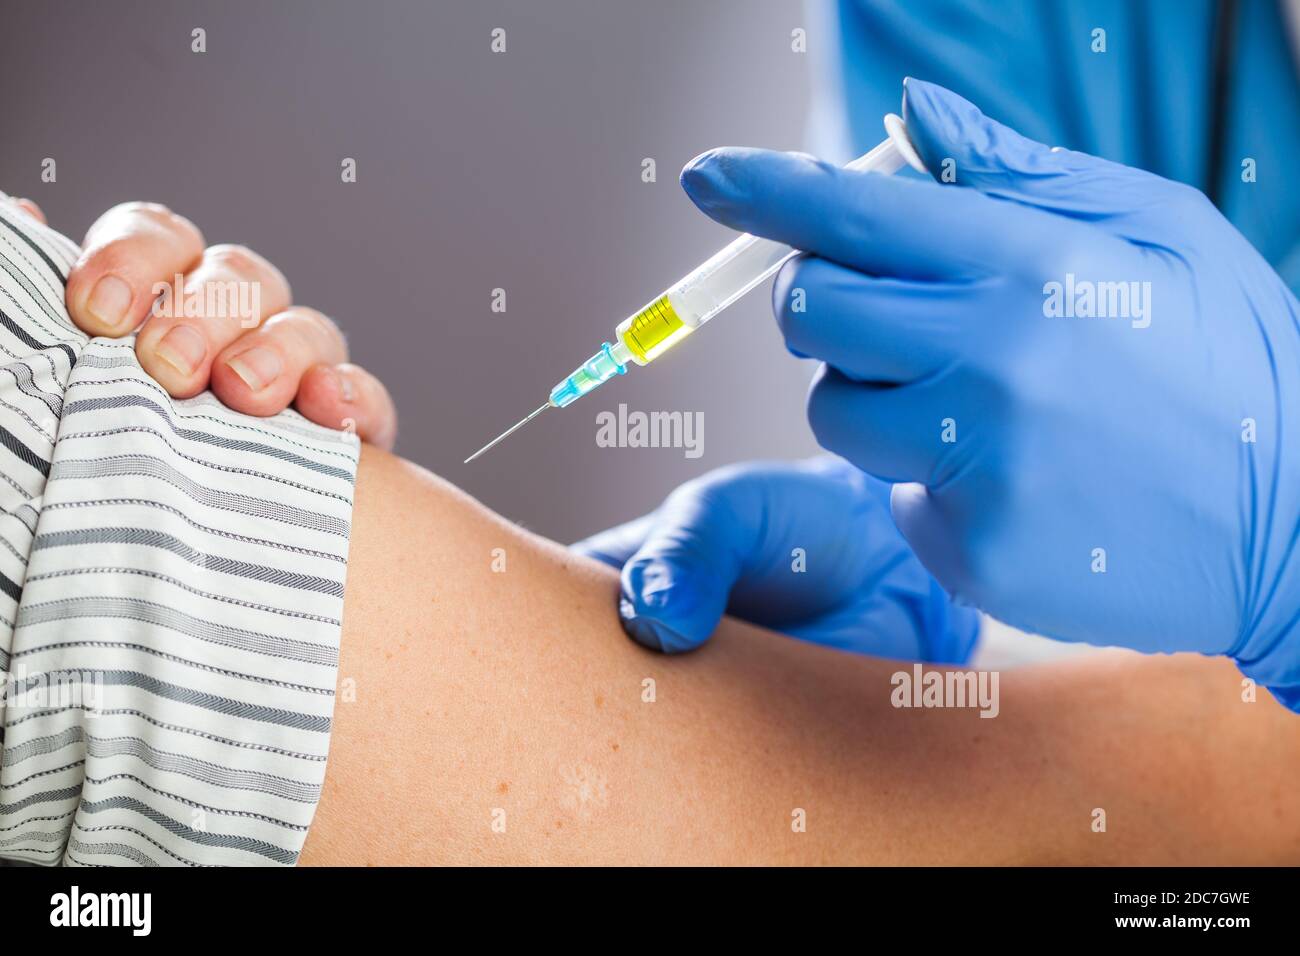 Coronavirus COVID-19 immunisation concept,medical worker wearing blue protective latex gloves holding syringe filled with yellow liquid,giving patient Stock Photo